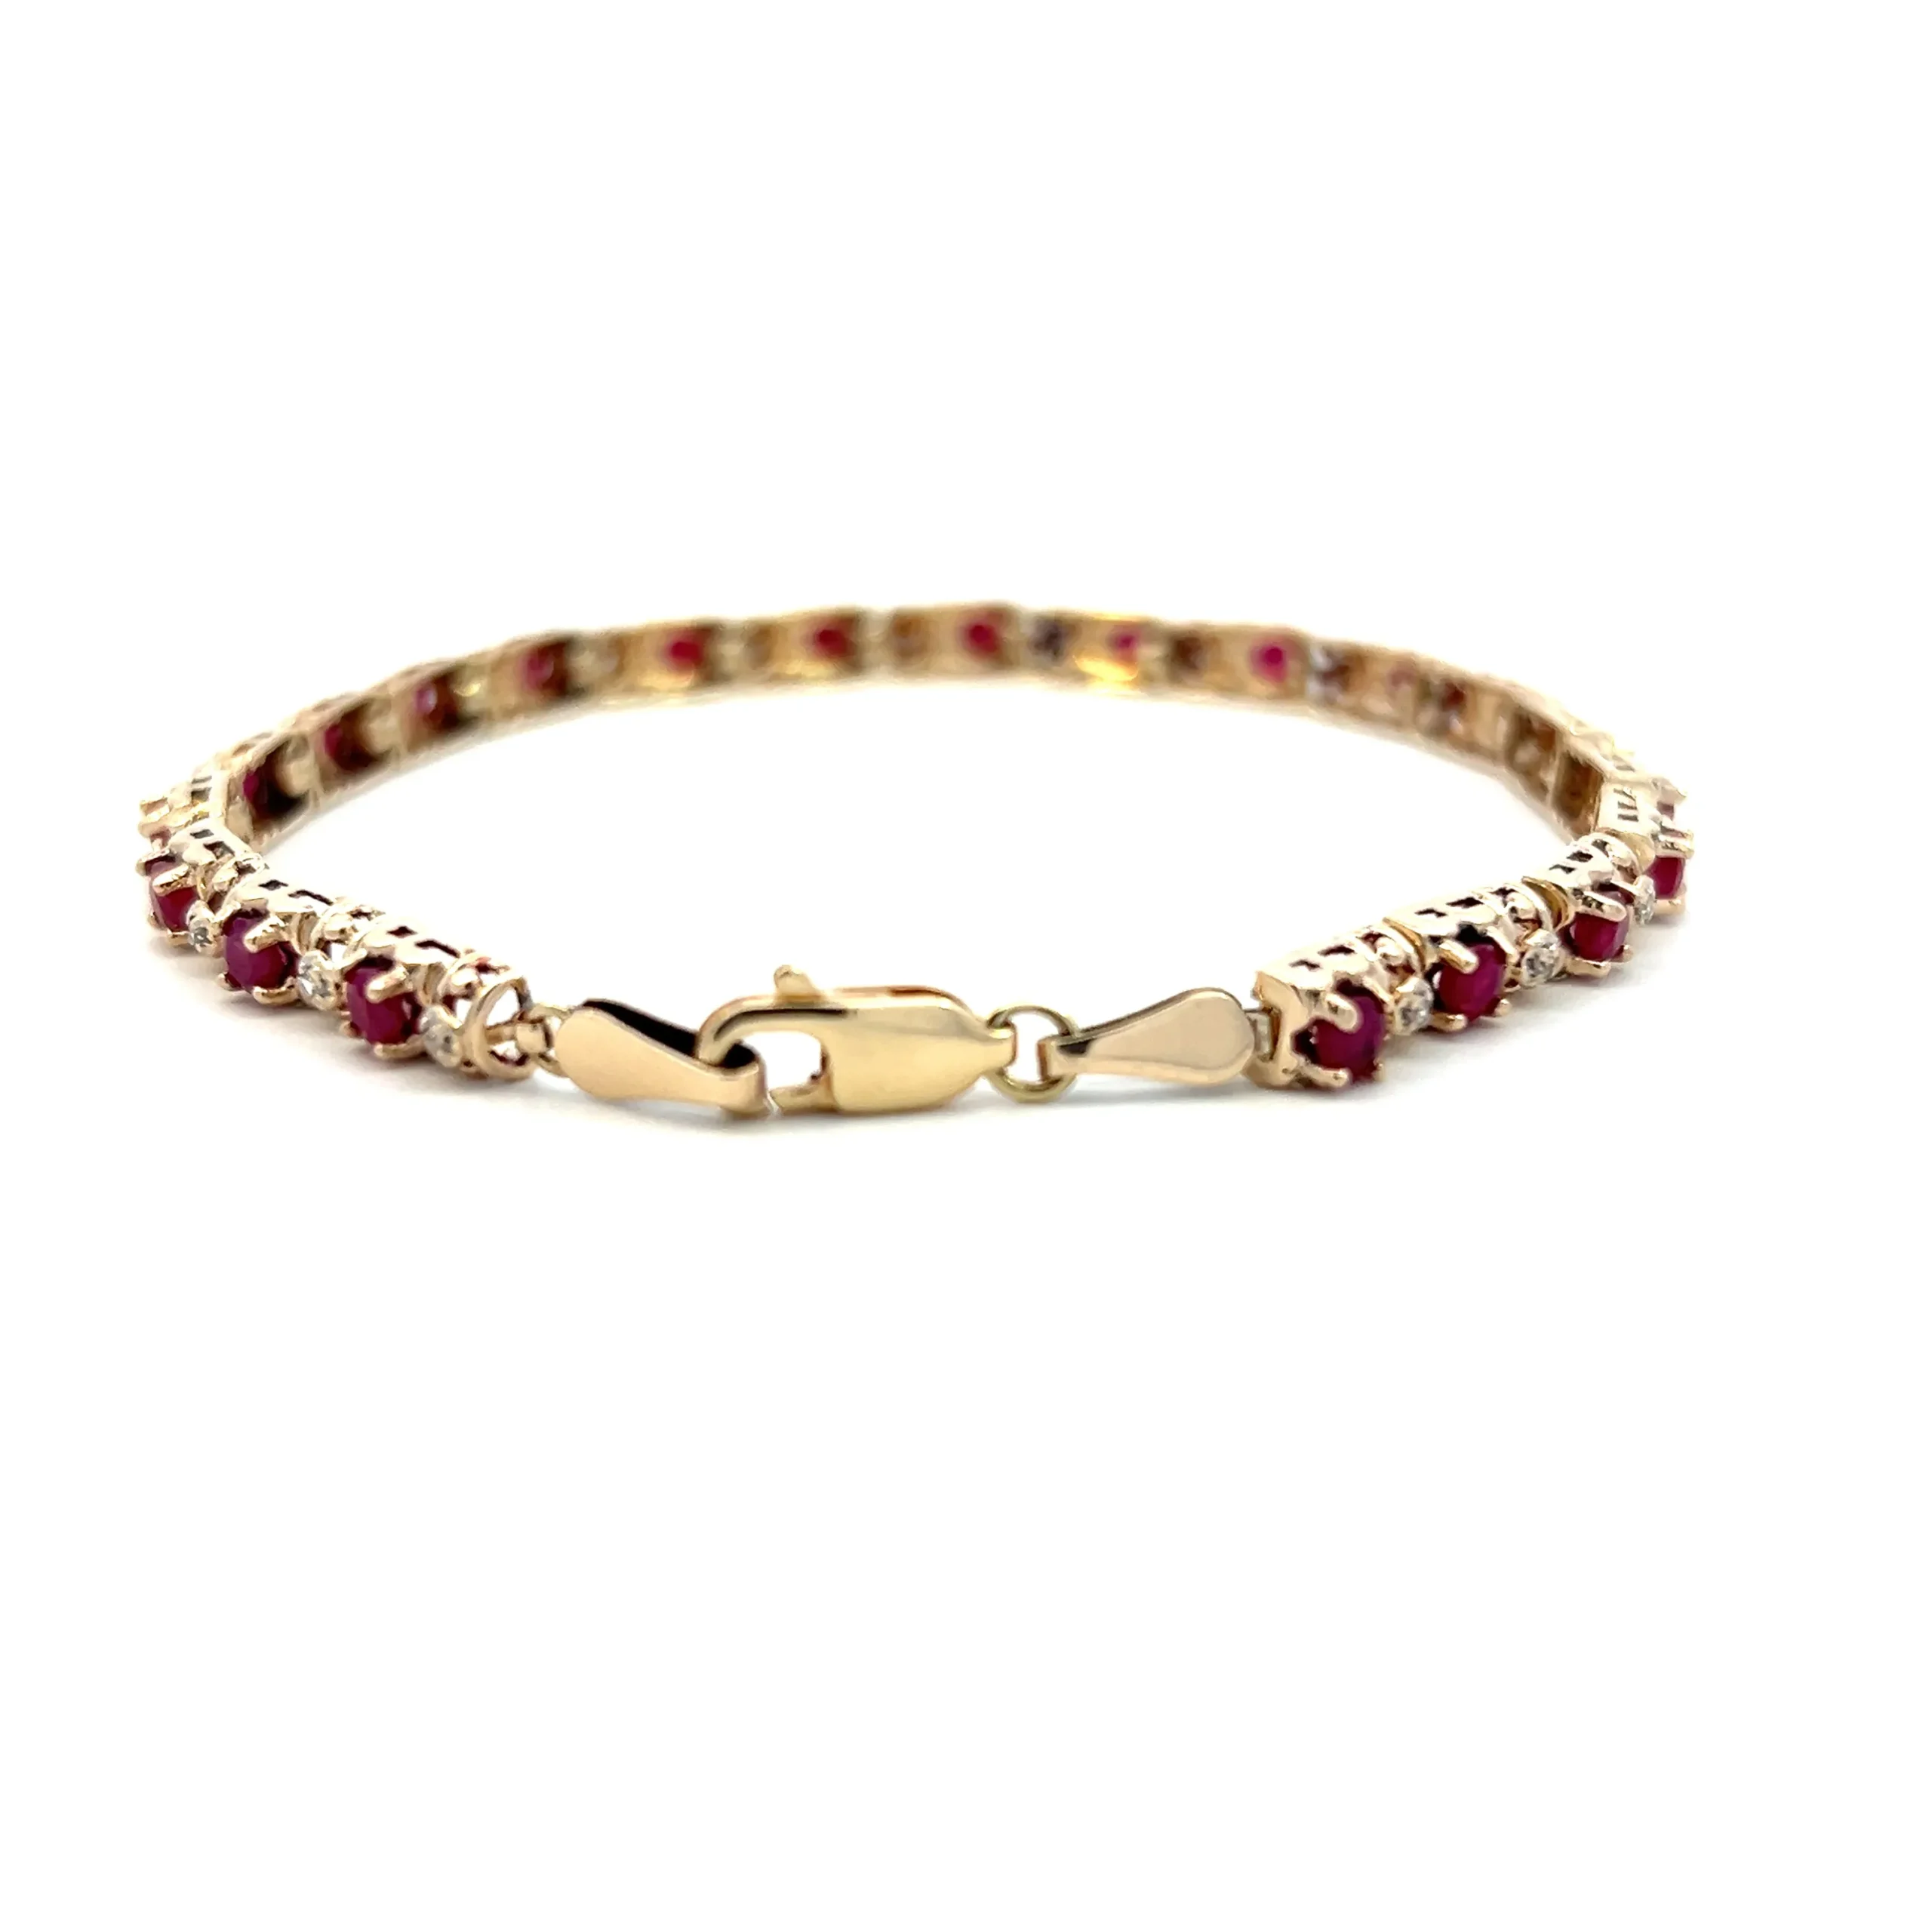 One estate 10 karat yellow gold ruby and diamond tennis bracelet with alternating between 21 round rubies measuring 2.80mm each and 21 round brilliant diamonds weighing 0.15 carat total weight. The bracelet measures 7" long with a lobster claw clasp.